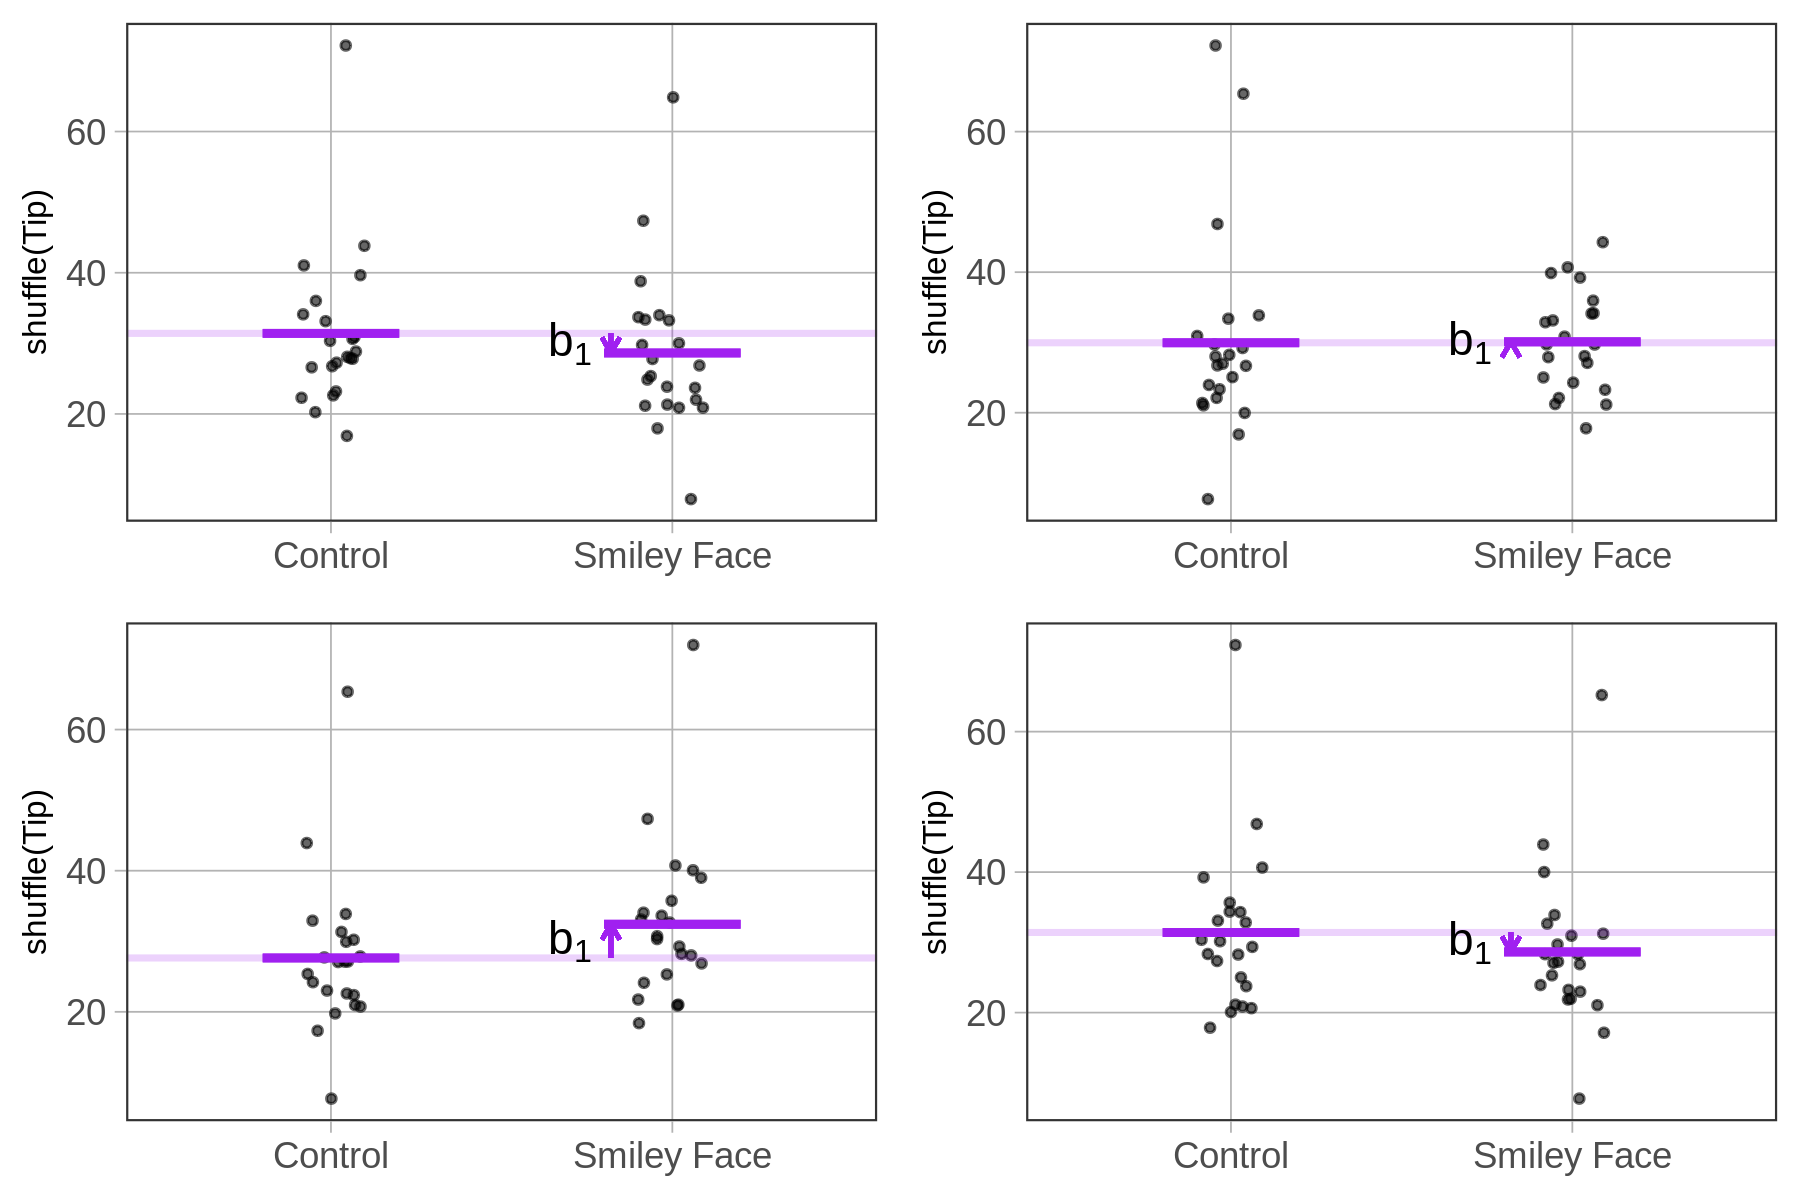 Grid of four jitter plots of shuffled Tip predicted by Condition (Control and Smiley Face). The mean of each group is plotted as horizontal lines, and the b-sub-one is drawn as the vertical distance between the group means. For each graph, the b-sub-one is slightly different. Sometimes the estimate is above the mean of Control, sometimes it is below, and some have hardly any difference between the two group means.